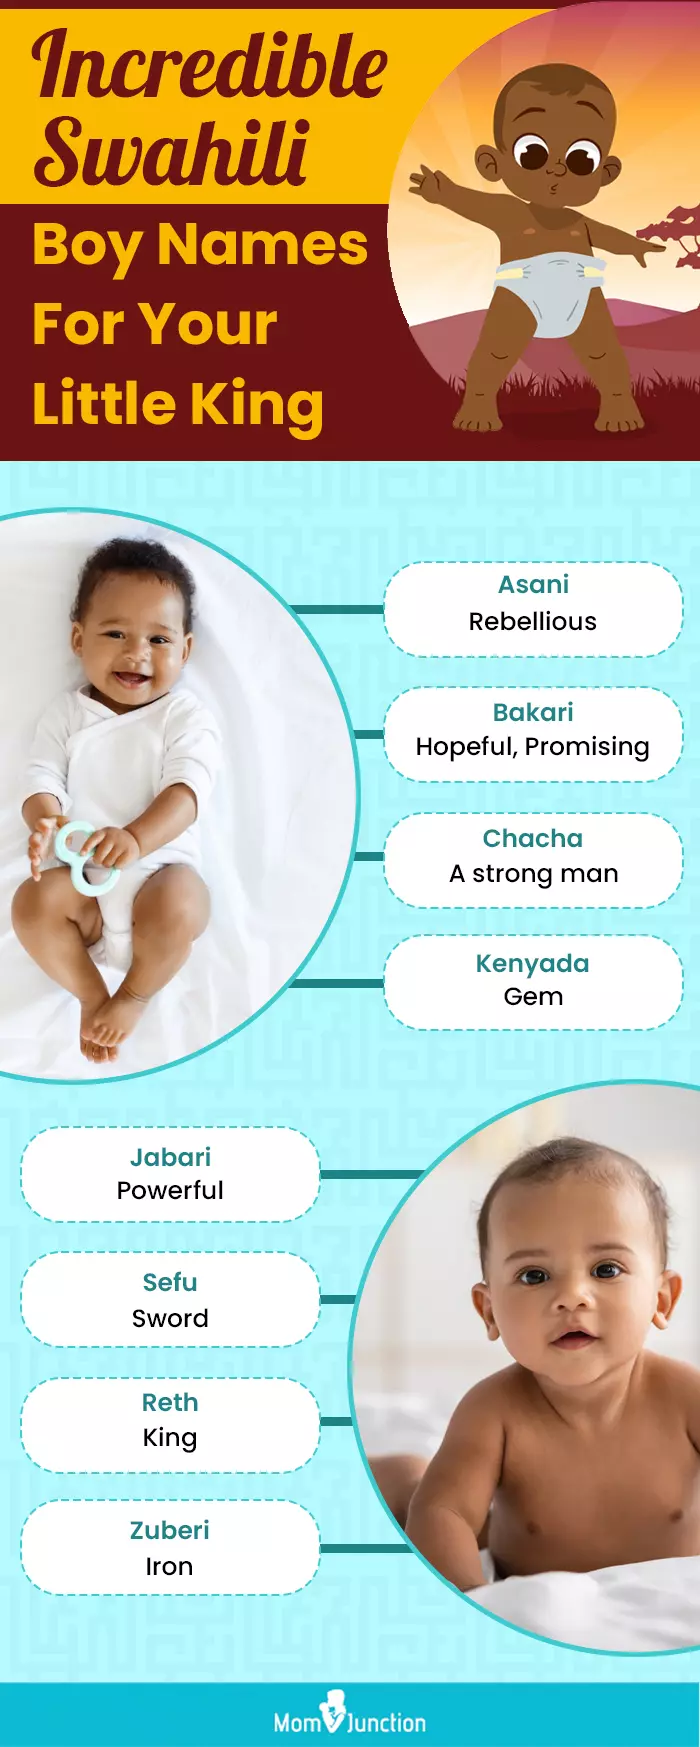 incredible swahili boy names for your little king (infographic)